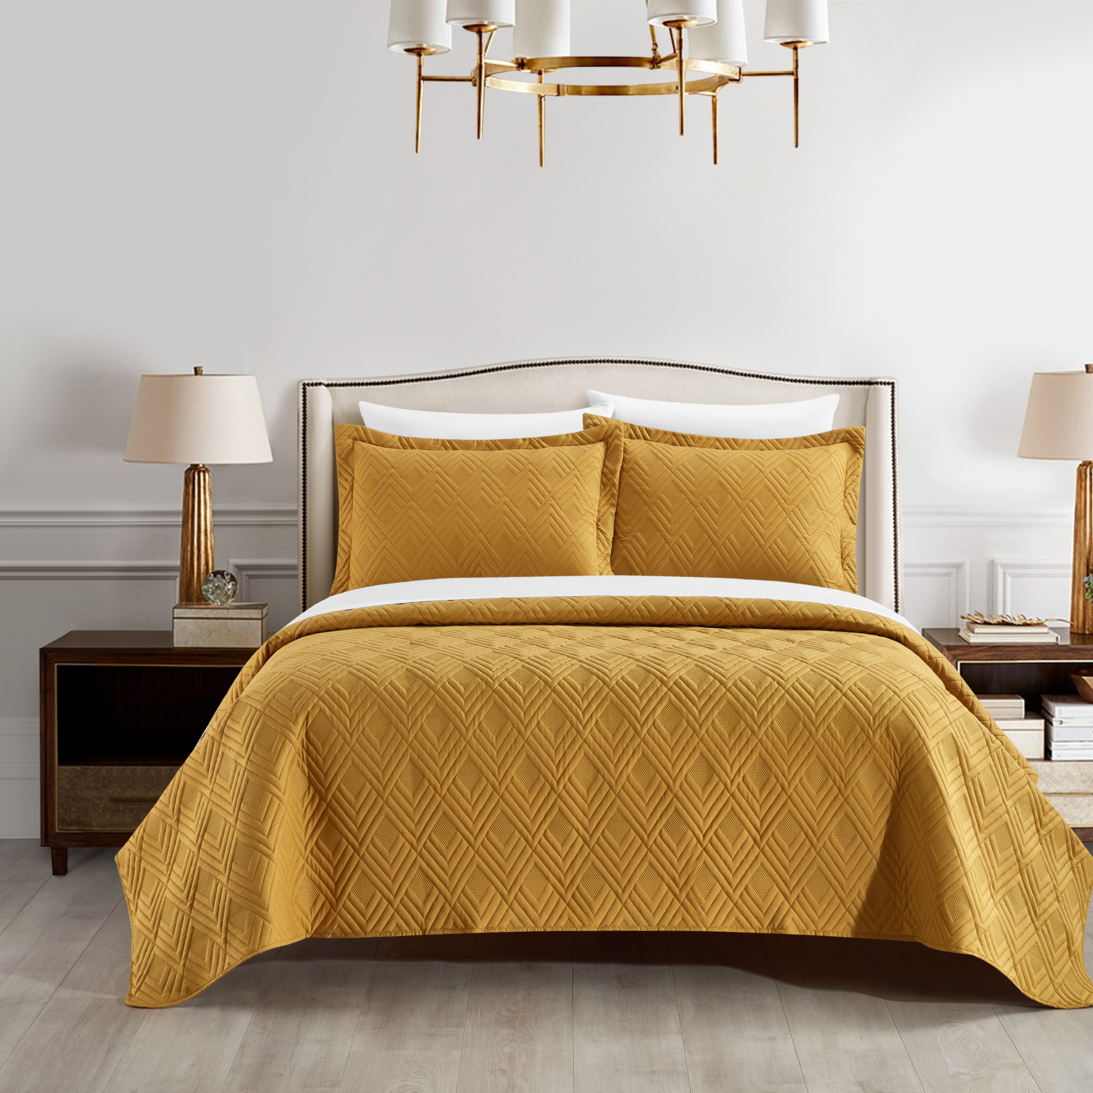 NY&CO Ahling 3 Piece Quilt Set Contemporary Geometric Diamond Pattern Bedding - Gold, Queen